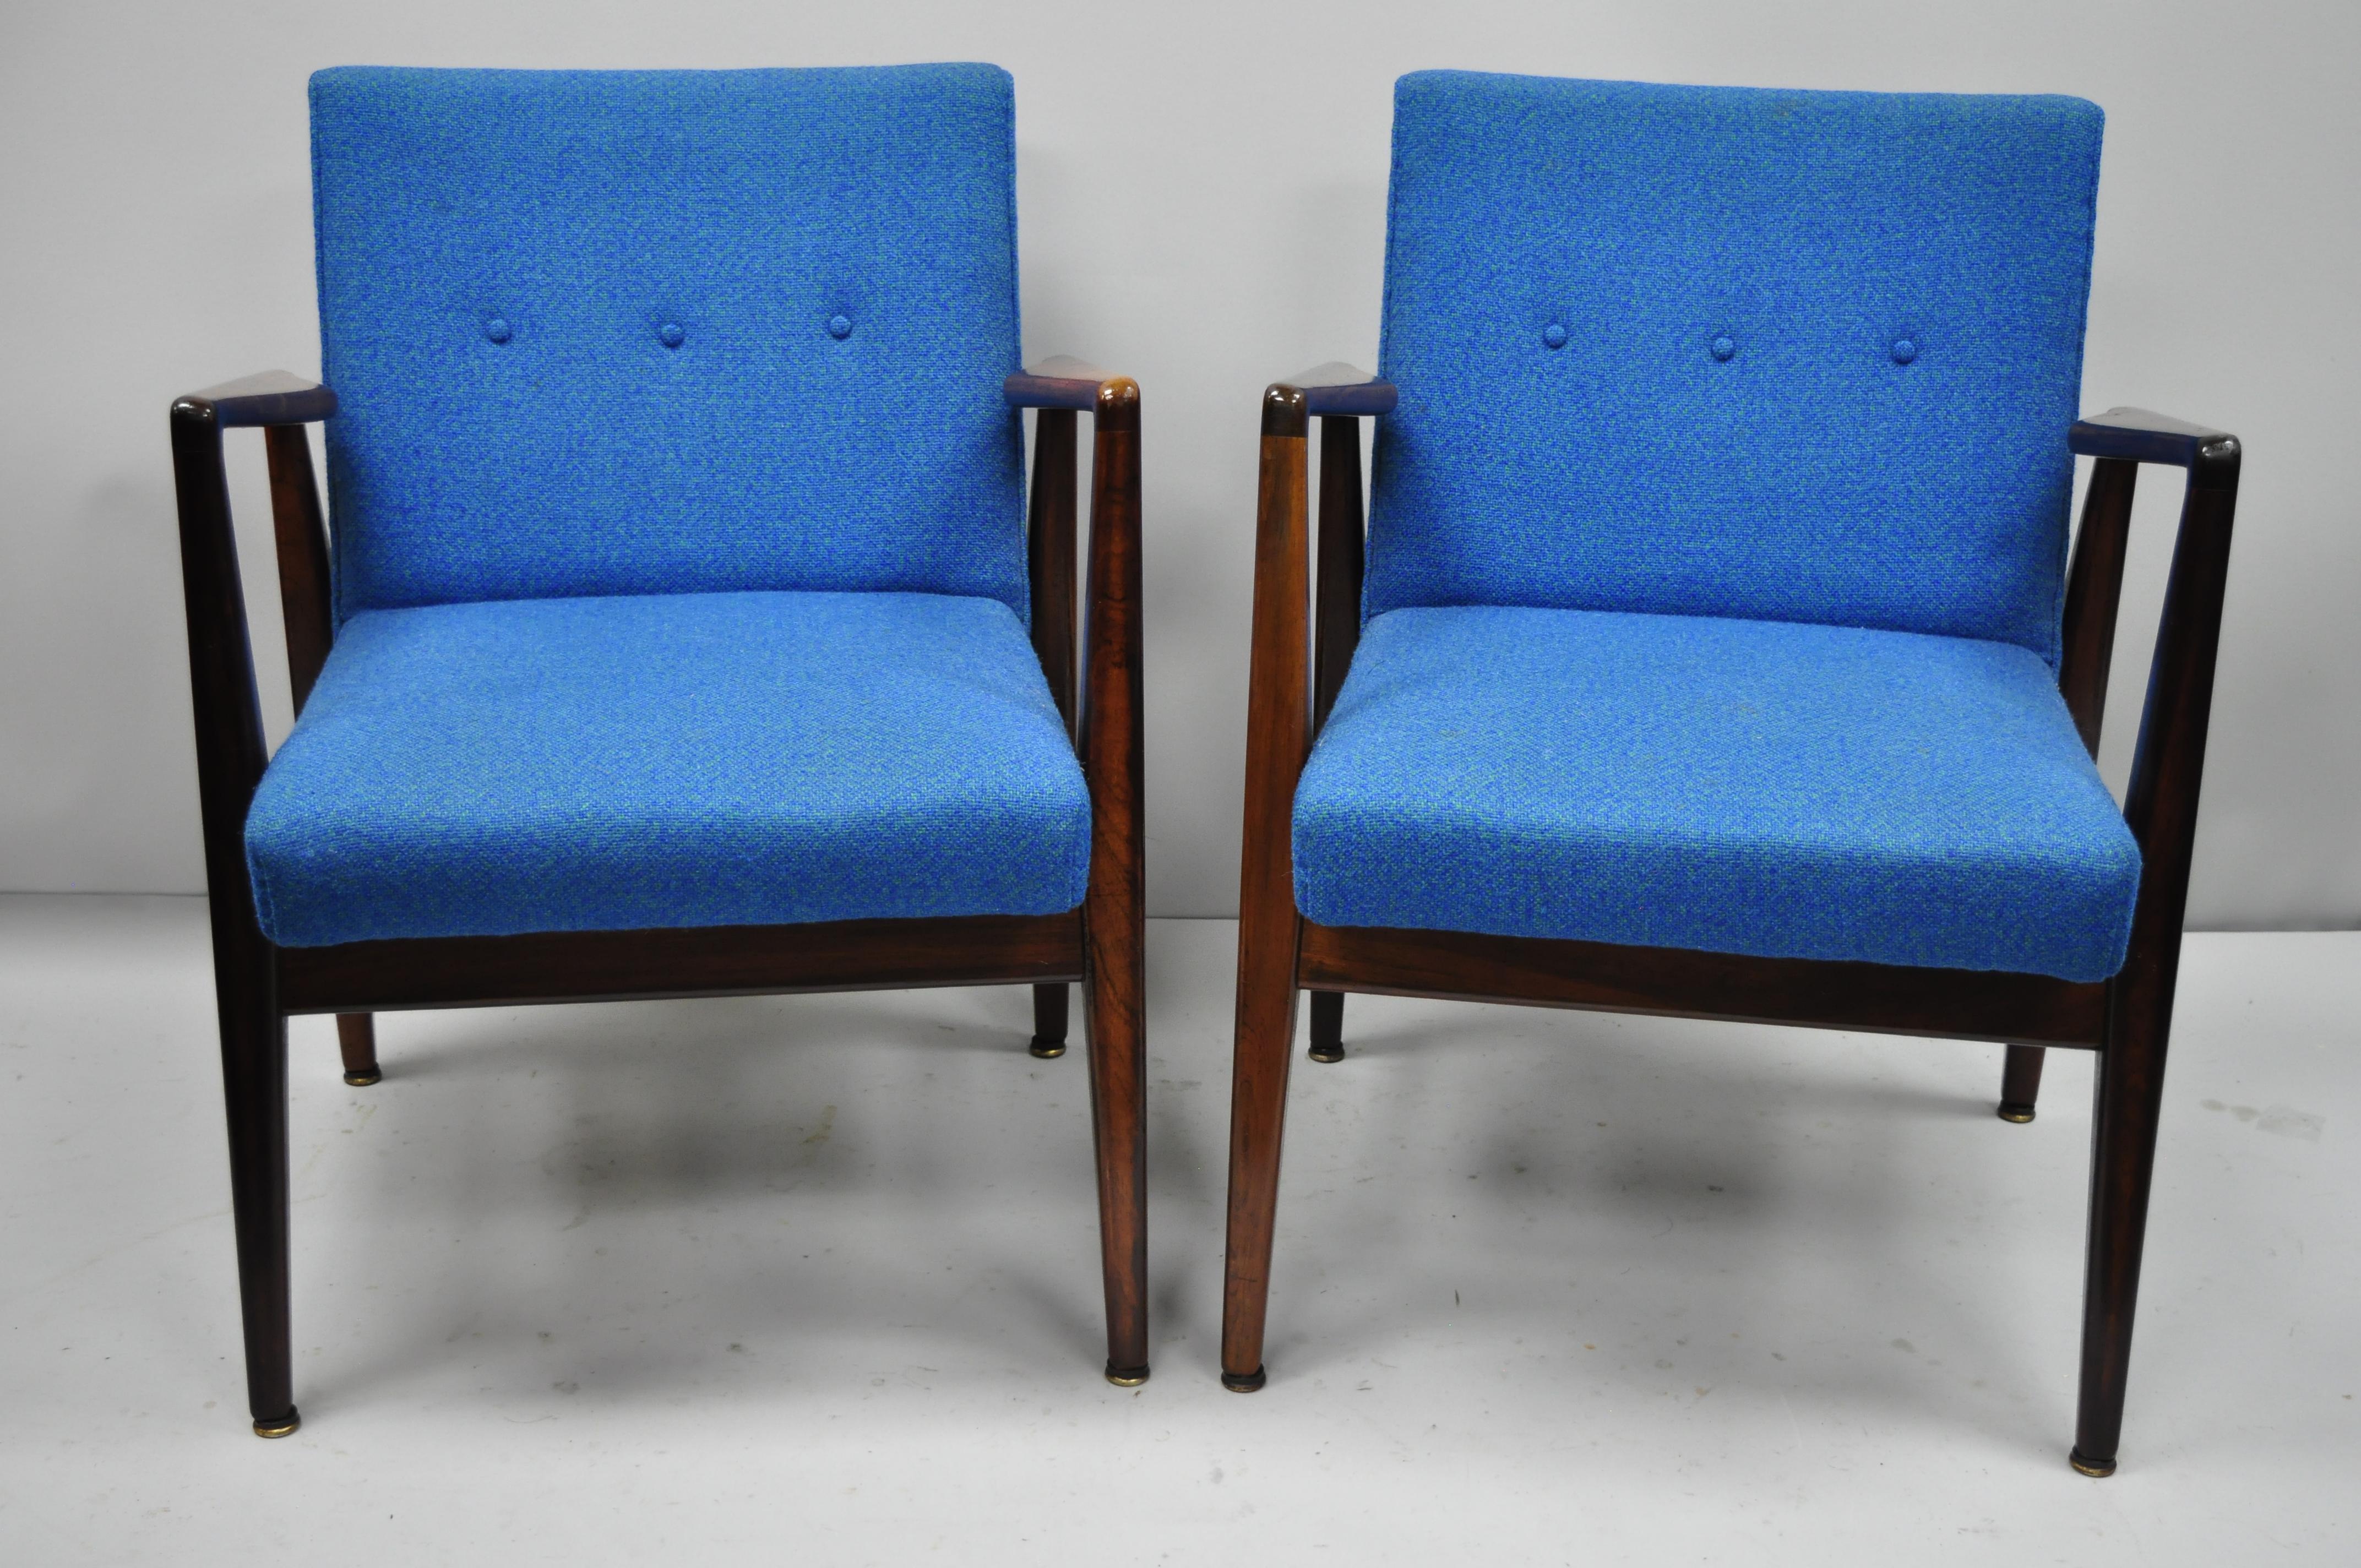 American Jens Risom Rosewood Mid-Century Modern Blue Fabric Lounge Chairs Armchairs, Pair For Sale